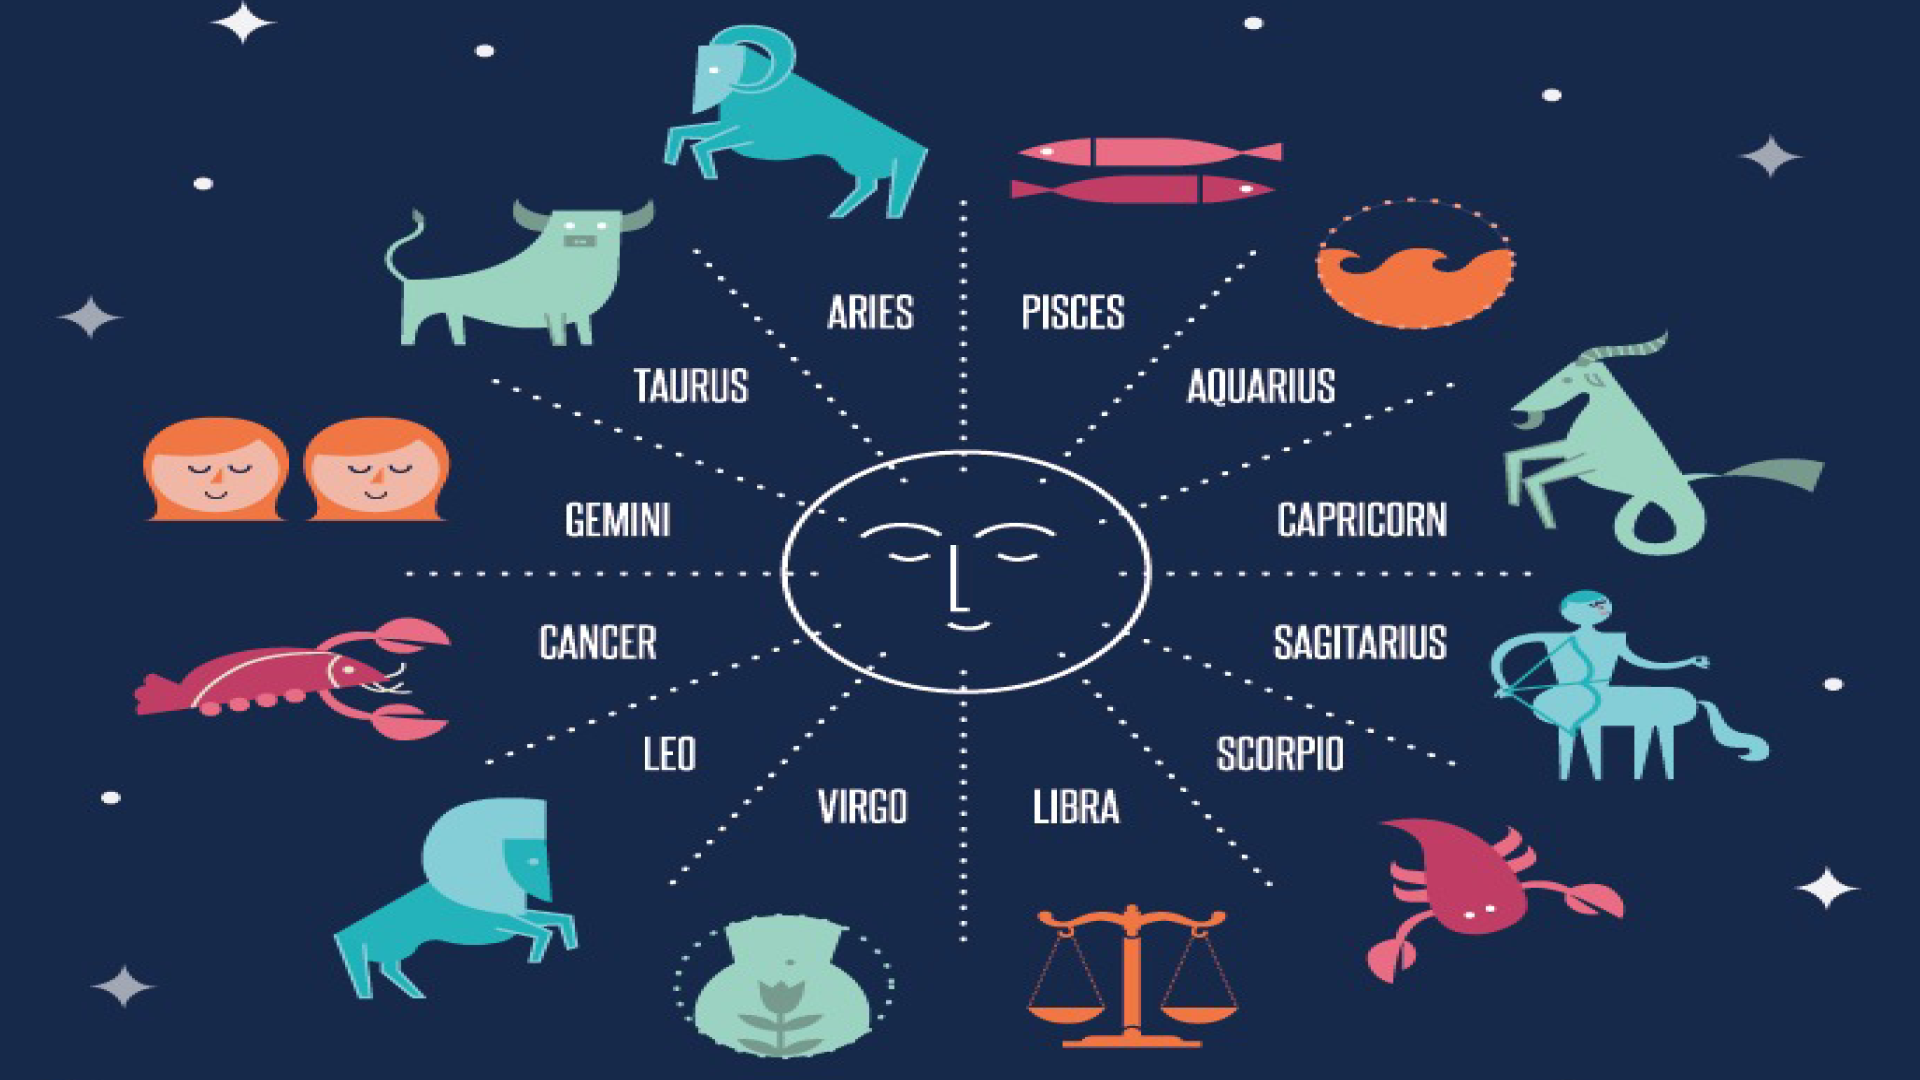 What Star Sign You Should Date Based on Your Zodiac. Love